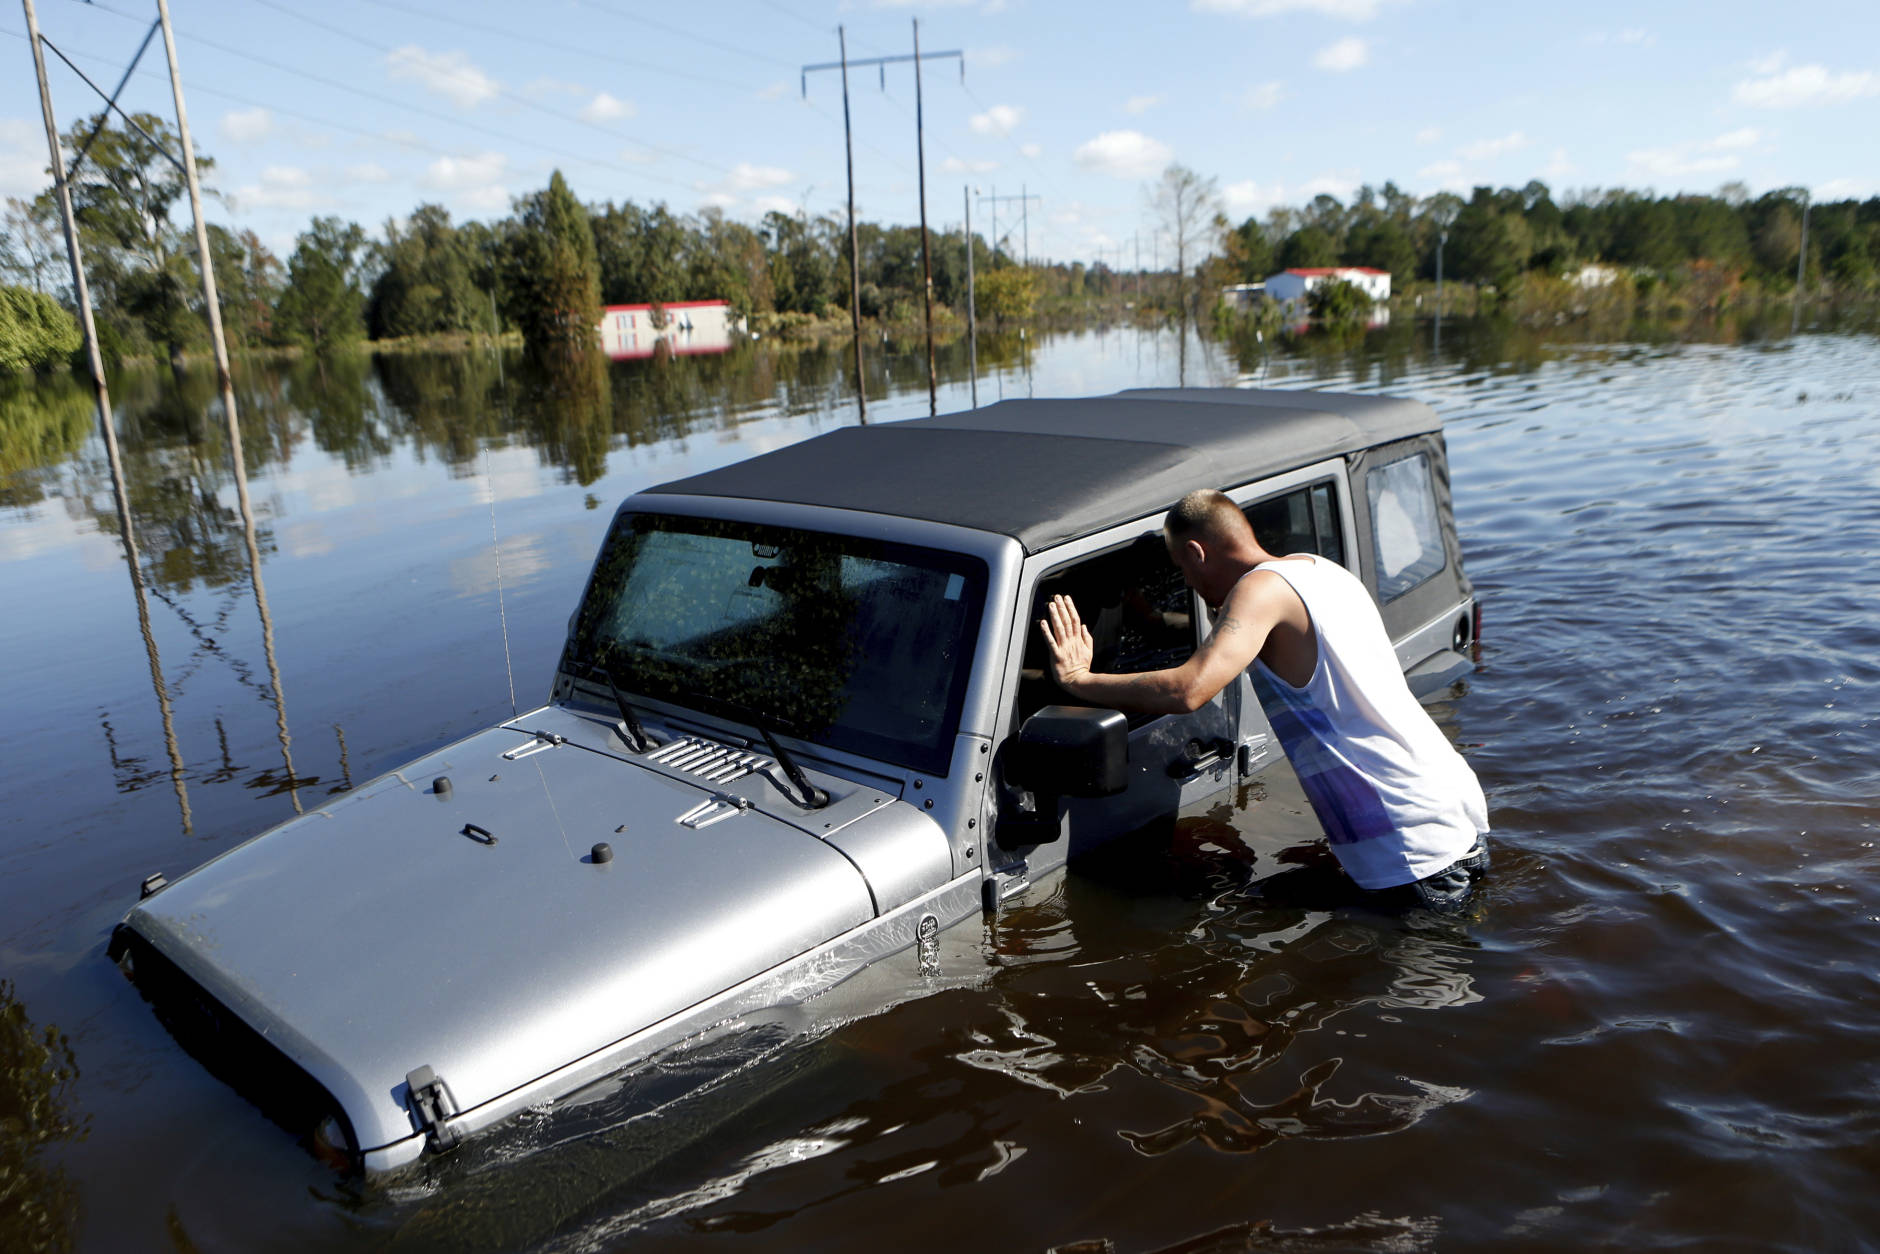 After coming across a Jeep surrounded by floodwaters associated with Hurricane Matthew,  Elmer McDonald inspects the interior to make certain nobody was inside as he makes his way through a strong current after checking on his own mobile home for the first time on Thursday, Oct. 13, 2016, in Lumberton, N.C.  About 1,200 Lumberton residents had to be evacuated by boat and plucked from their roofs by helicopters as the river crested; McDonald was one of thousands who evacuated. (AP Photo/Brian Blanco)